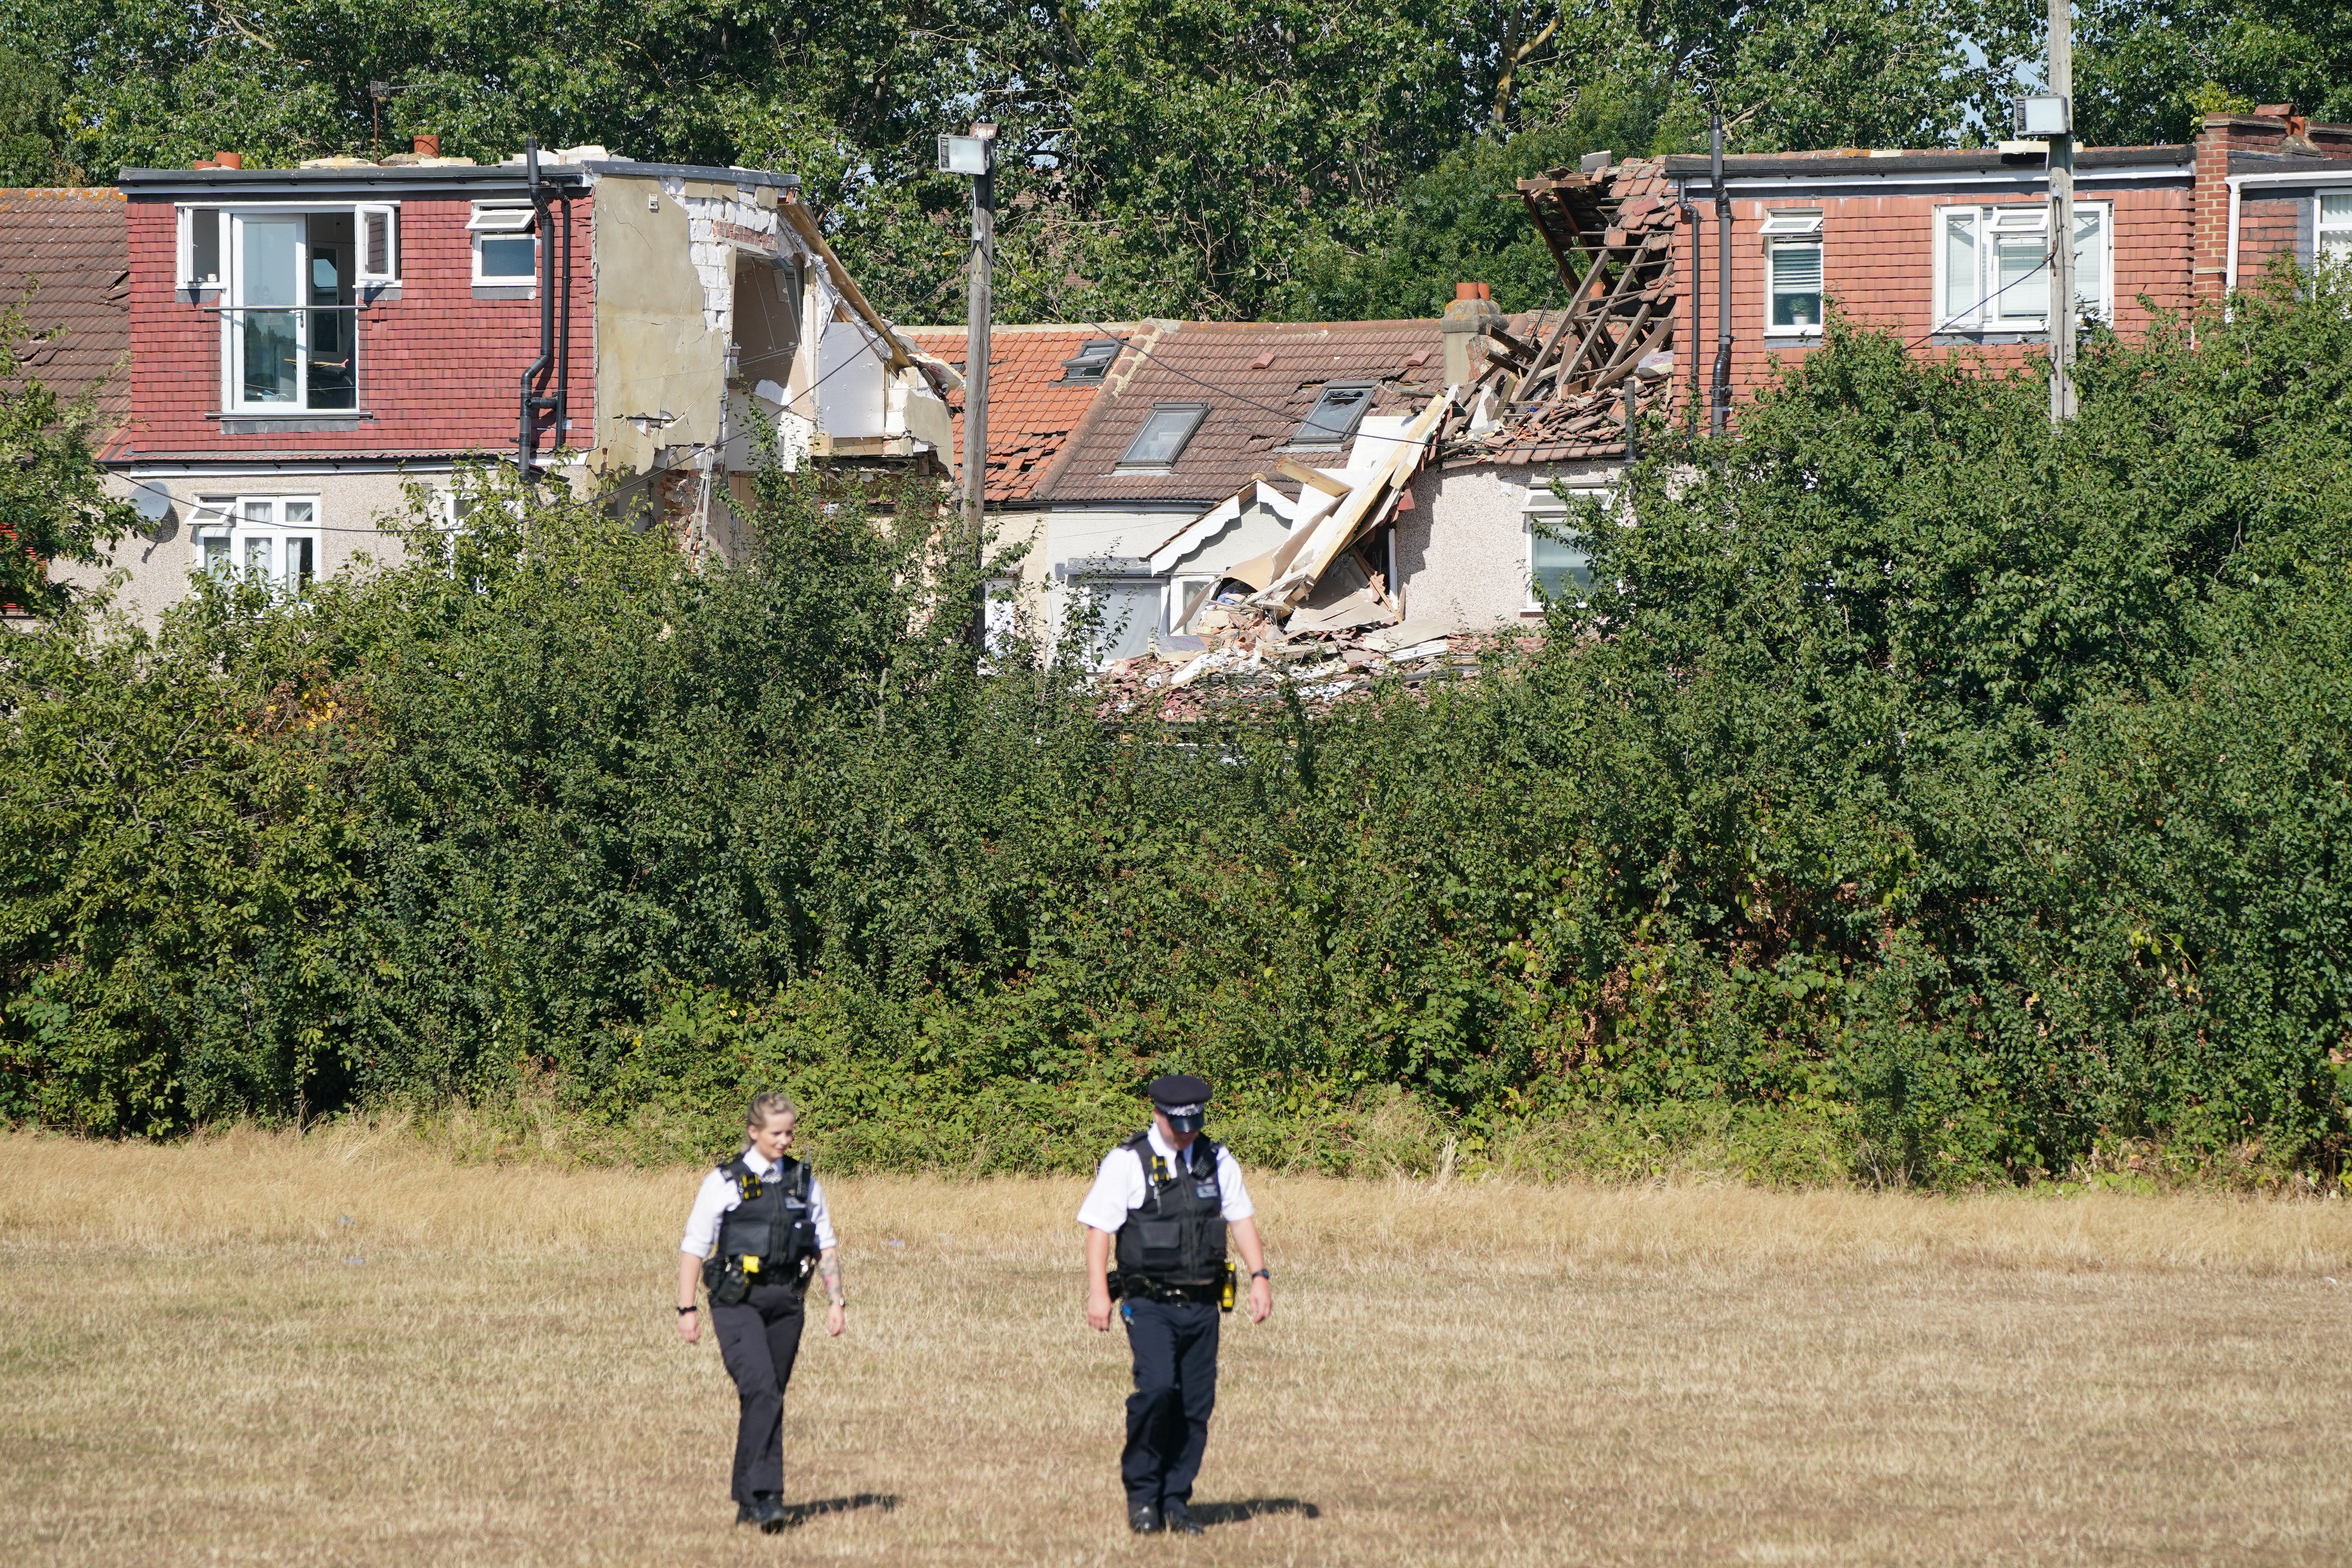 Emergency services at the scene in Galpin’s Road in Thornton Heath, south London, where the London Fire Brigade (LFB) report that a house has collapsed (Dominic Lipinski/PA)